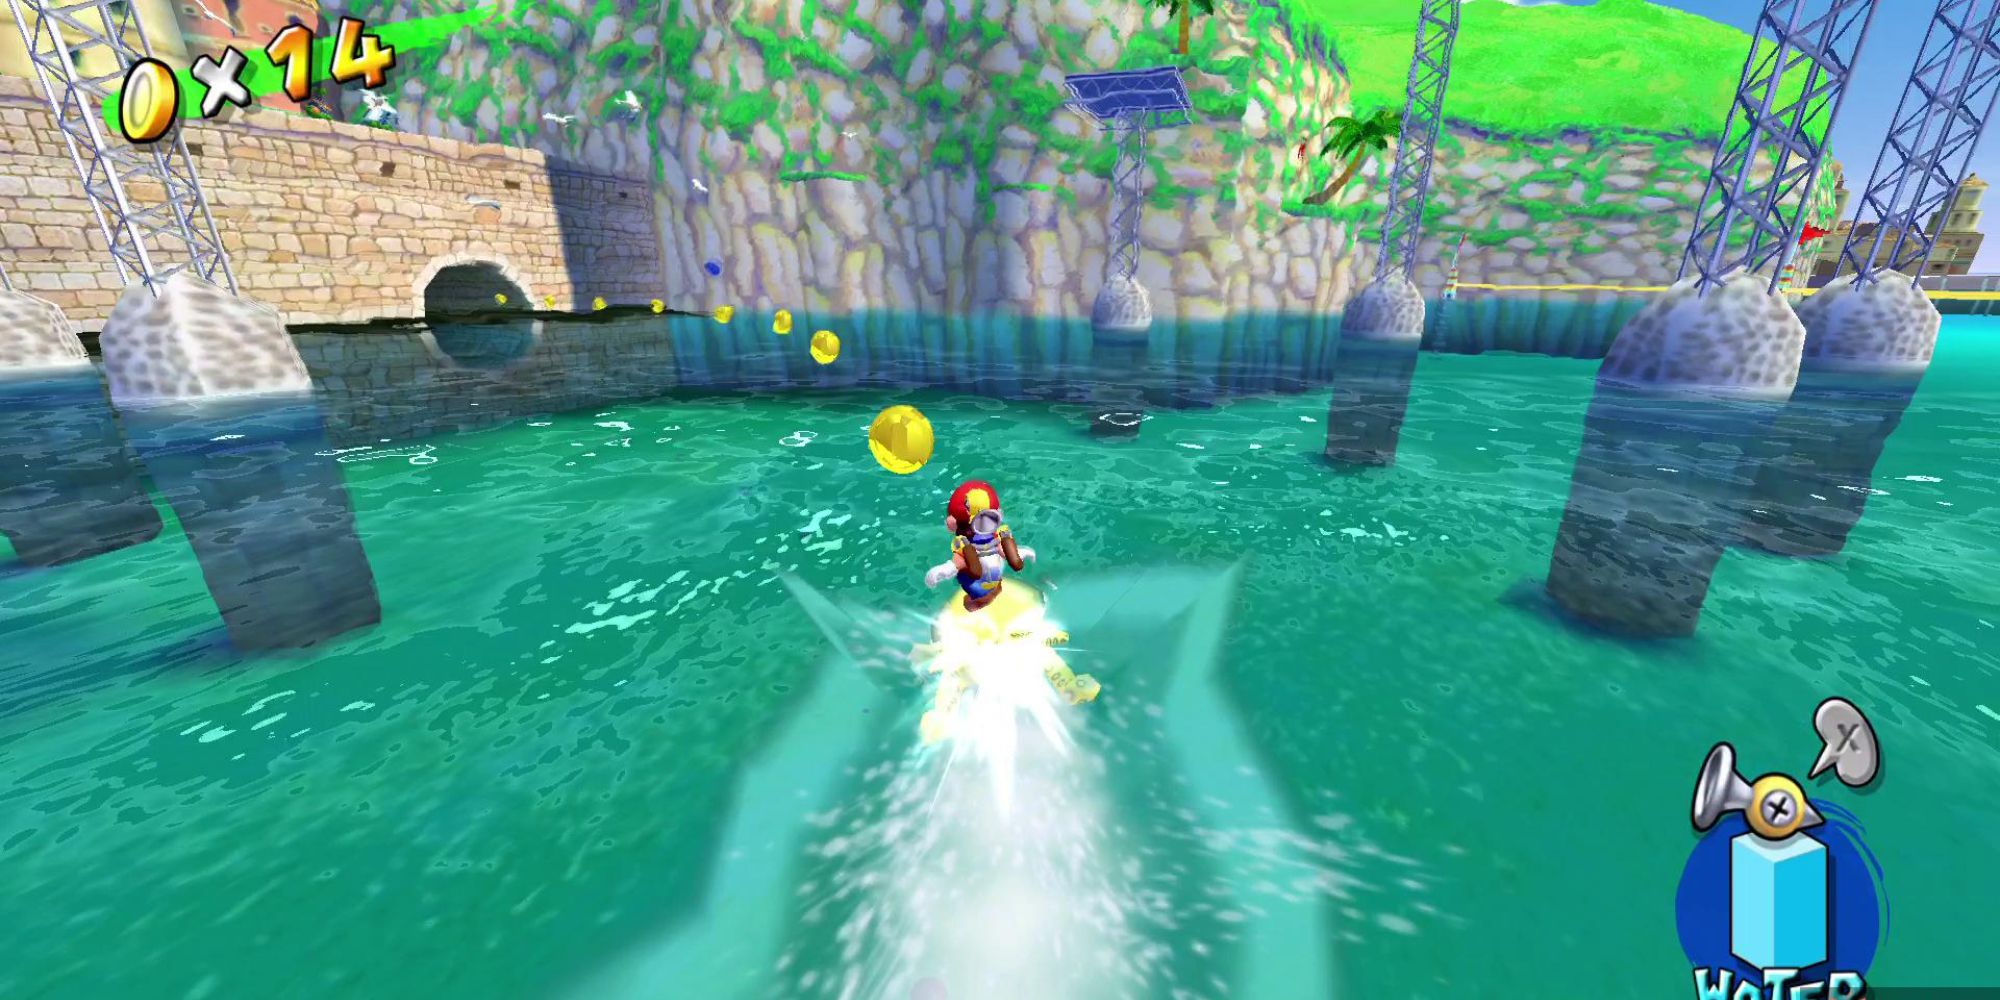 Mario surfing on a Blooper